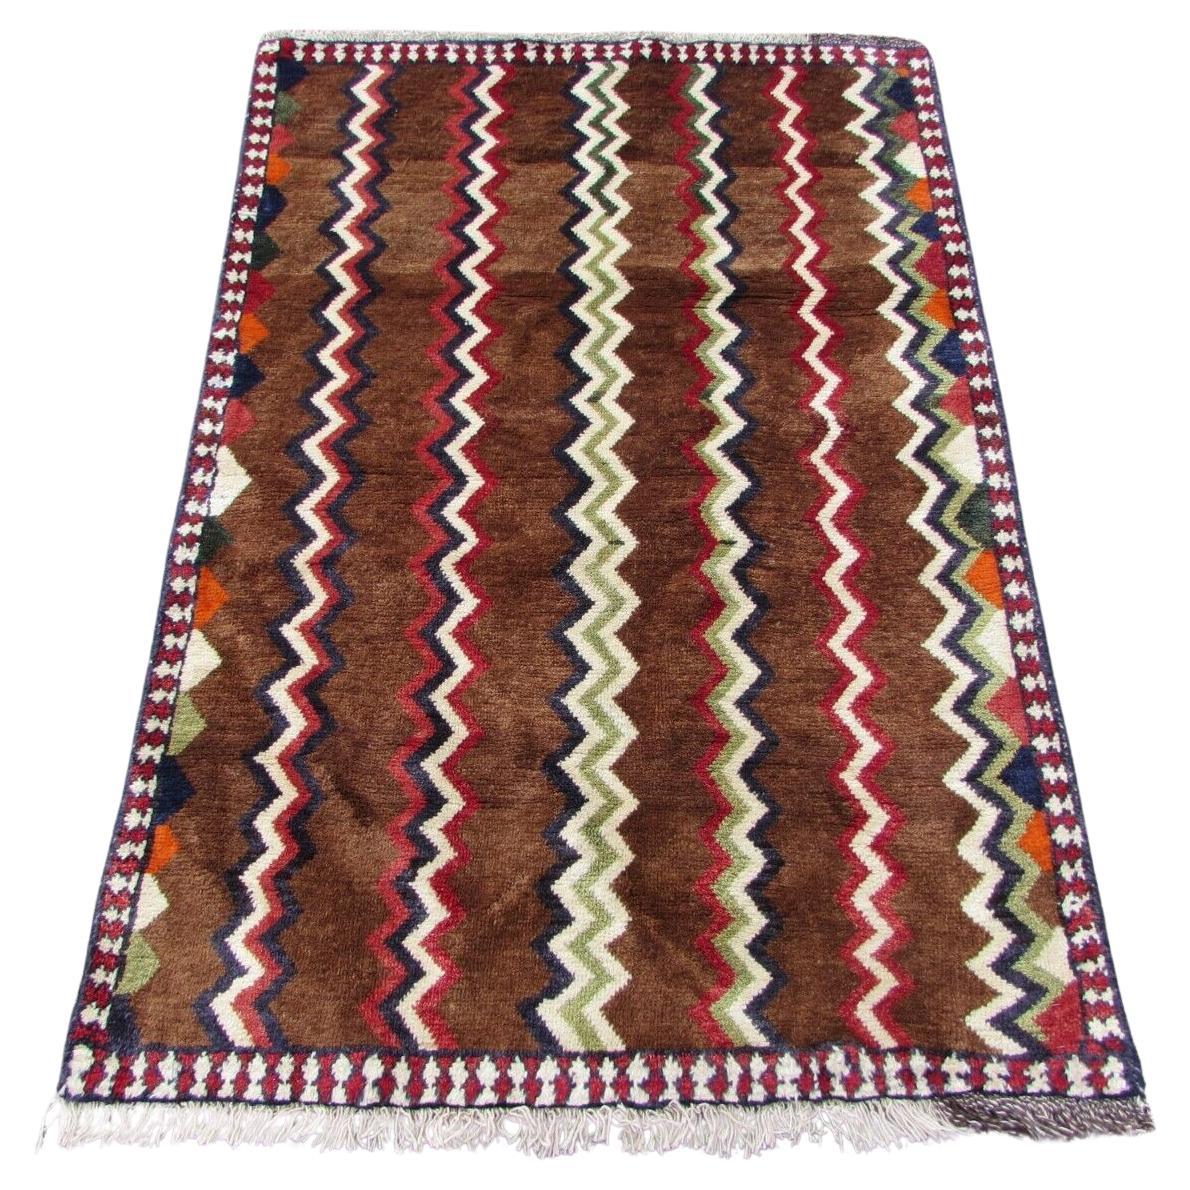 Handmade Vintage Persian Style Gabbeh Rug 3.1' x 4.5', 1970s - 1Q70 For Sale